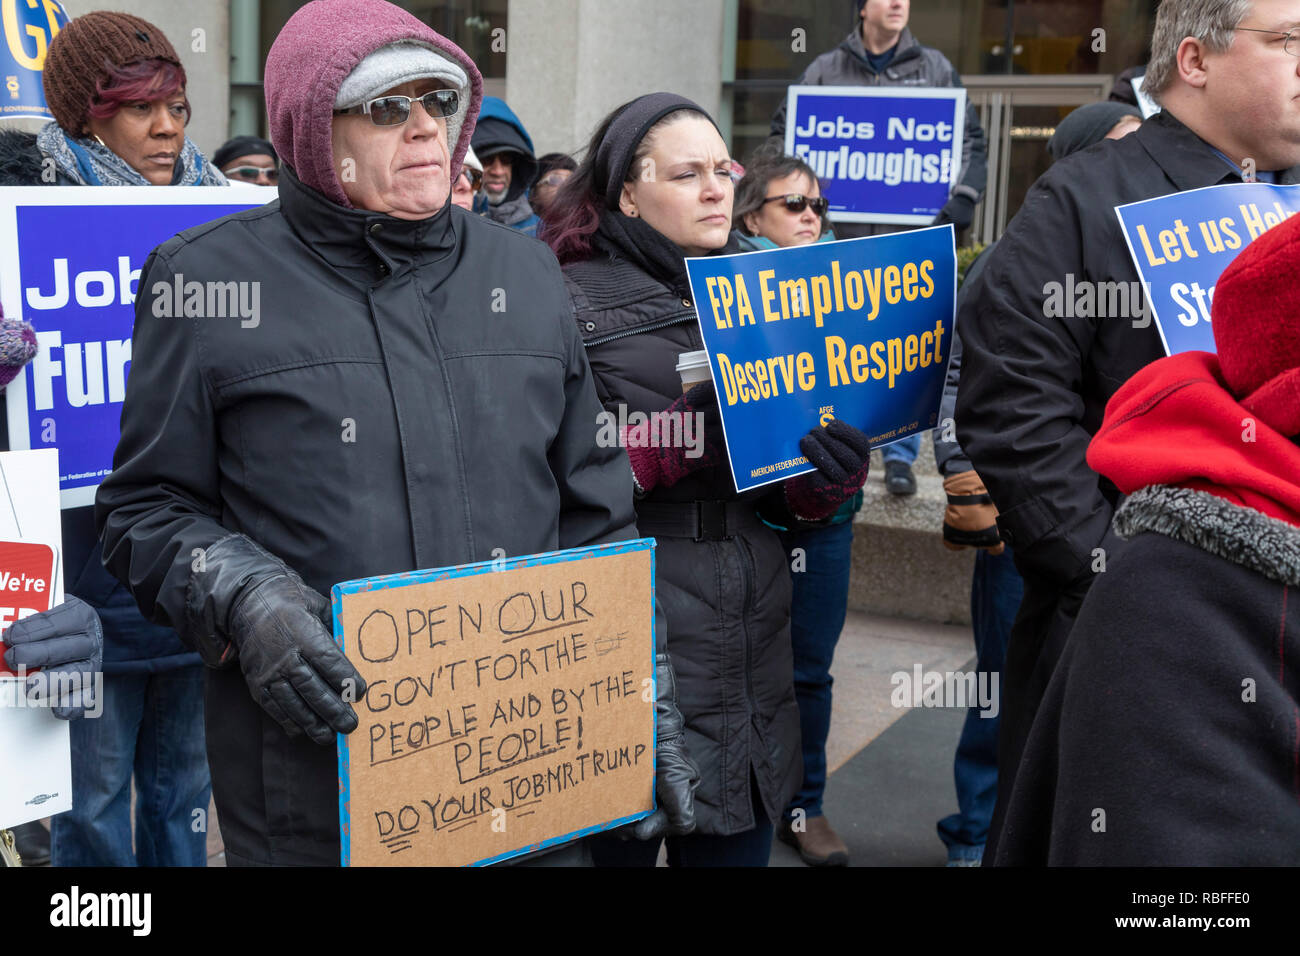 Detroit, Michigan USA - 10 January 2019 - Federal government employees rally at the federal McNamara Building to protest the partial government shutdown. The protest was led by the American Federation of Government Employees (AFGE). Many government agencies were closed after Congress would not agree to President Trump's demand for $5 billion to build a wall along the Mexican border. Credit: Jim West/Alamy Live News Stock Photo